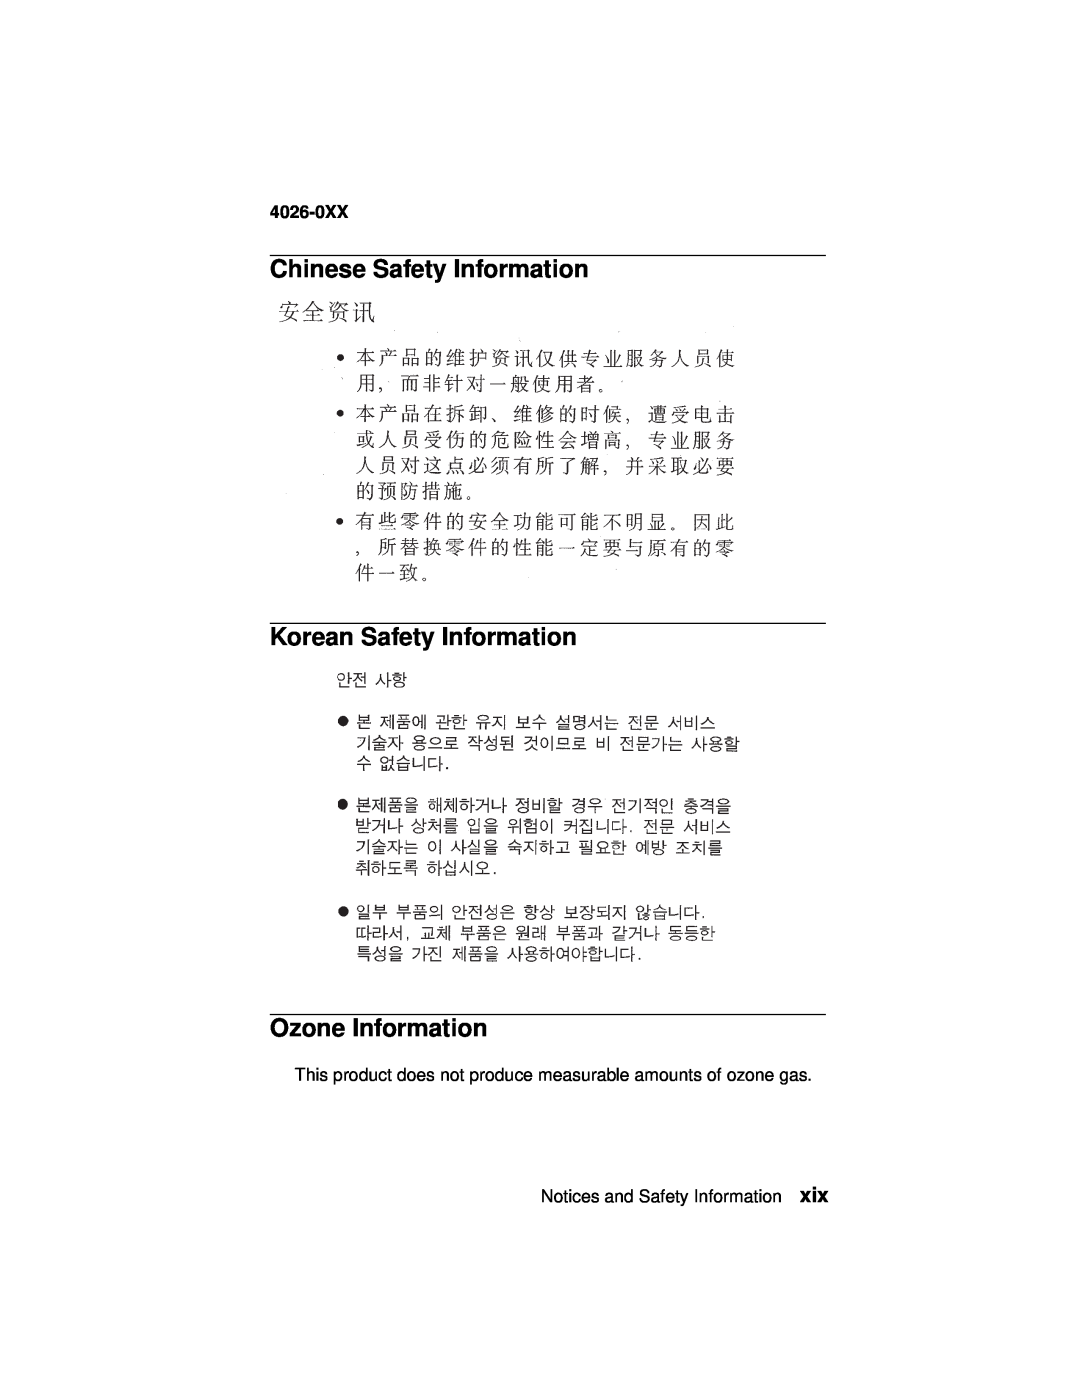 Lexmark OptraTM manual Chinese Safety Information, Korean Safety Information Ozone Information, 4026-0XX 